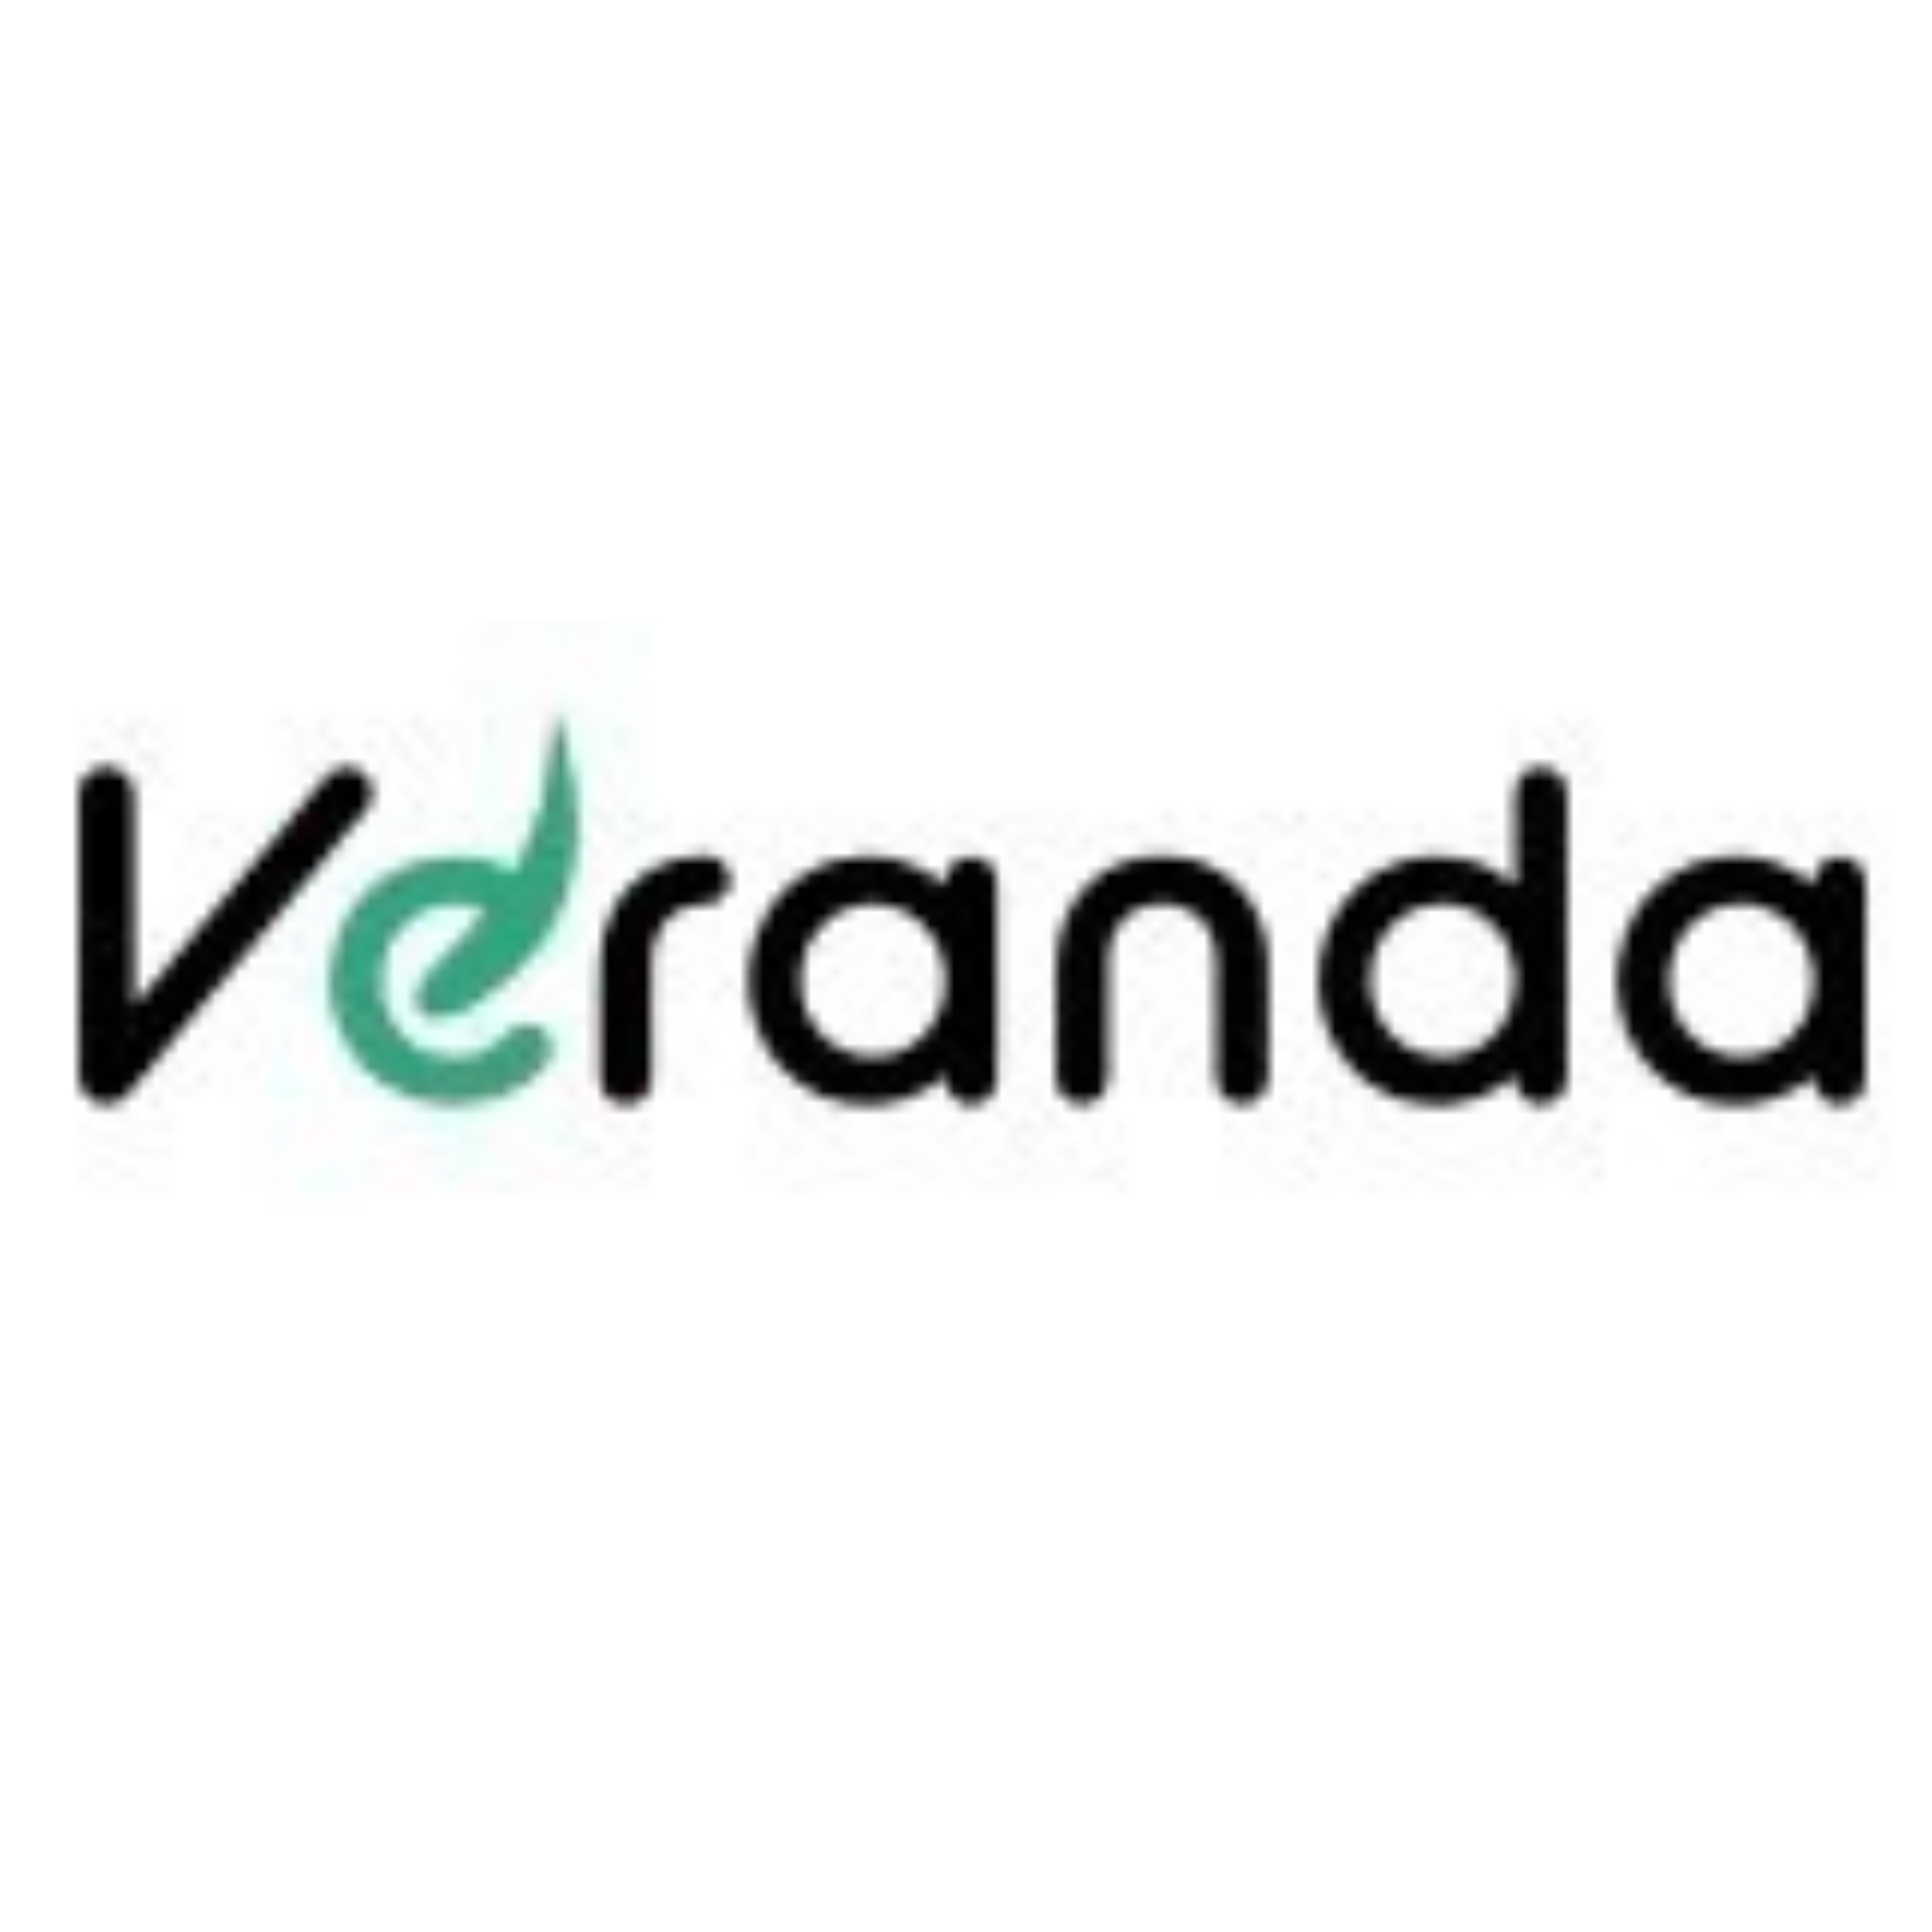 Veranda Learning to raise Rs. 300 crores via preferential Issue-thumnail